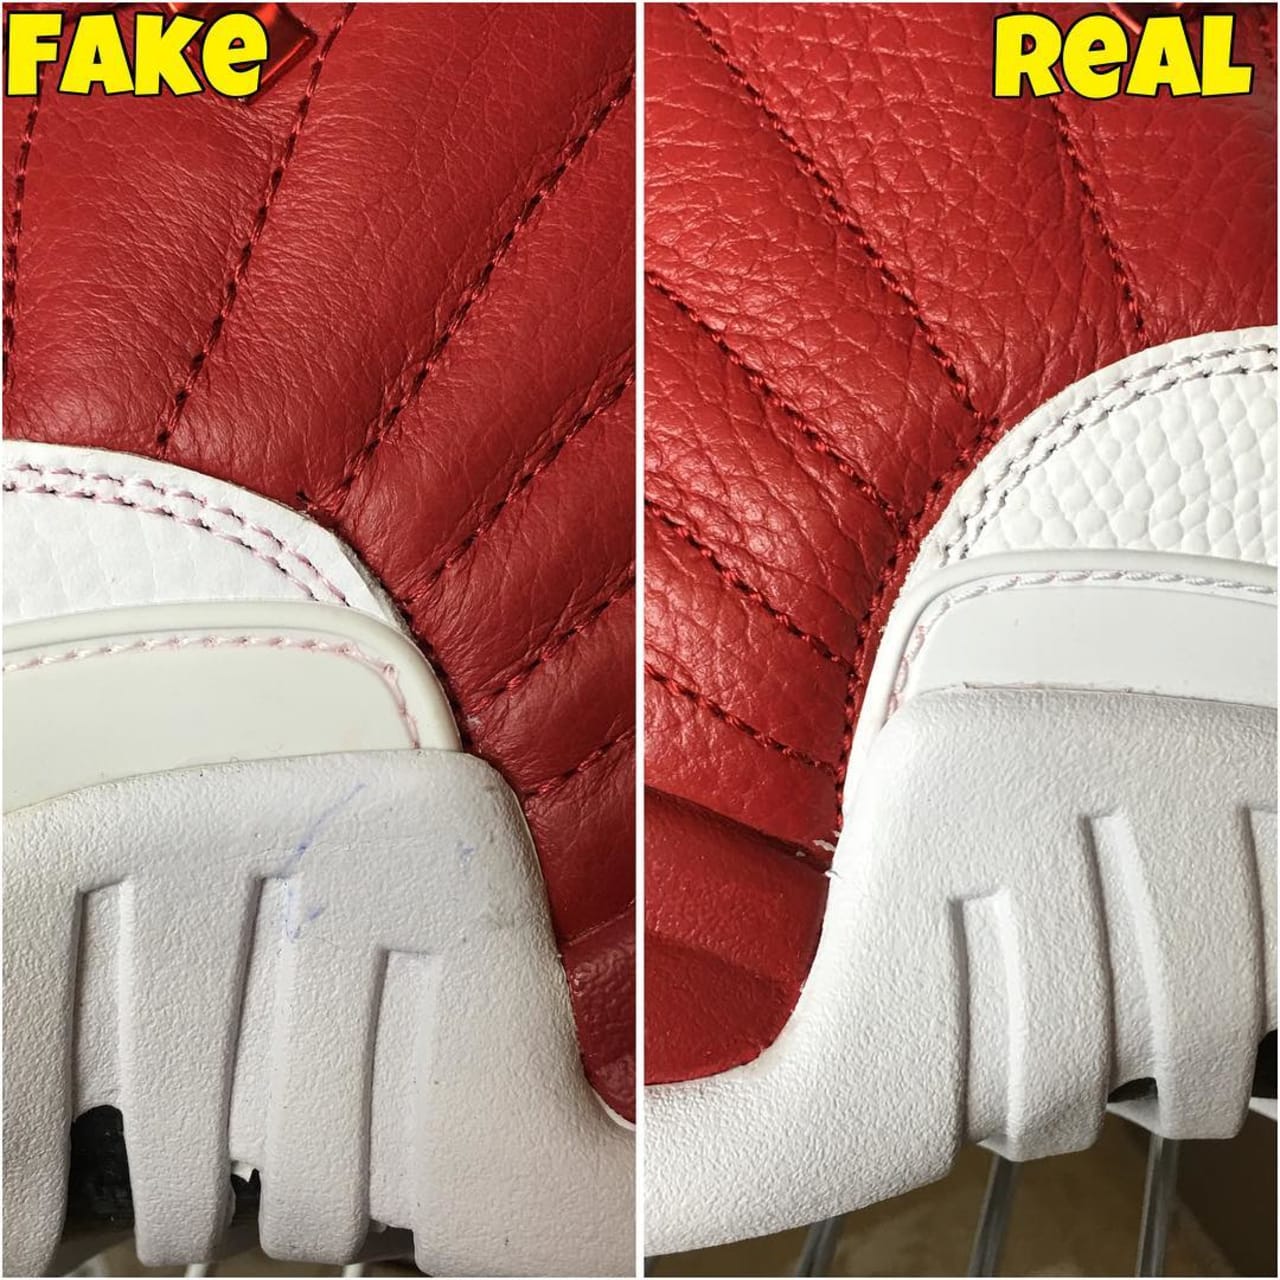 Air Jordan Xii 12 Gym Red Real Fake Legit Check Sole Collector